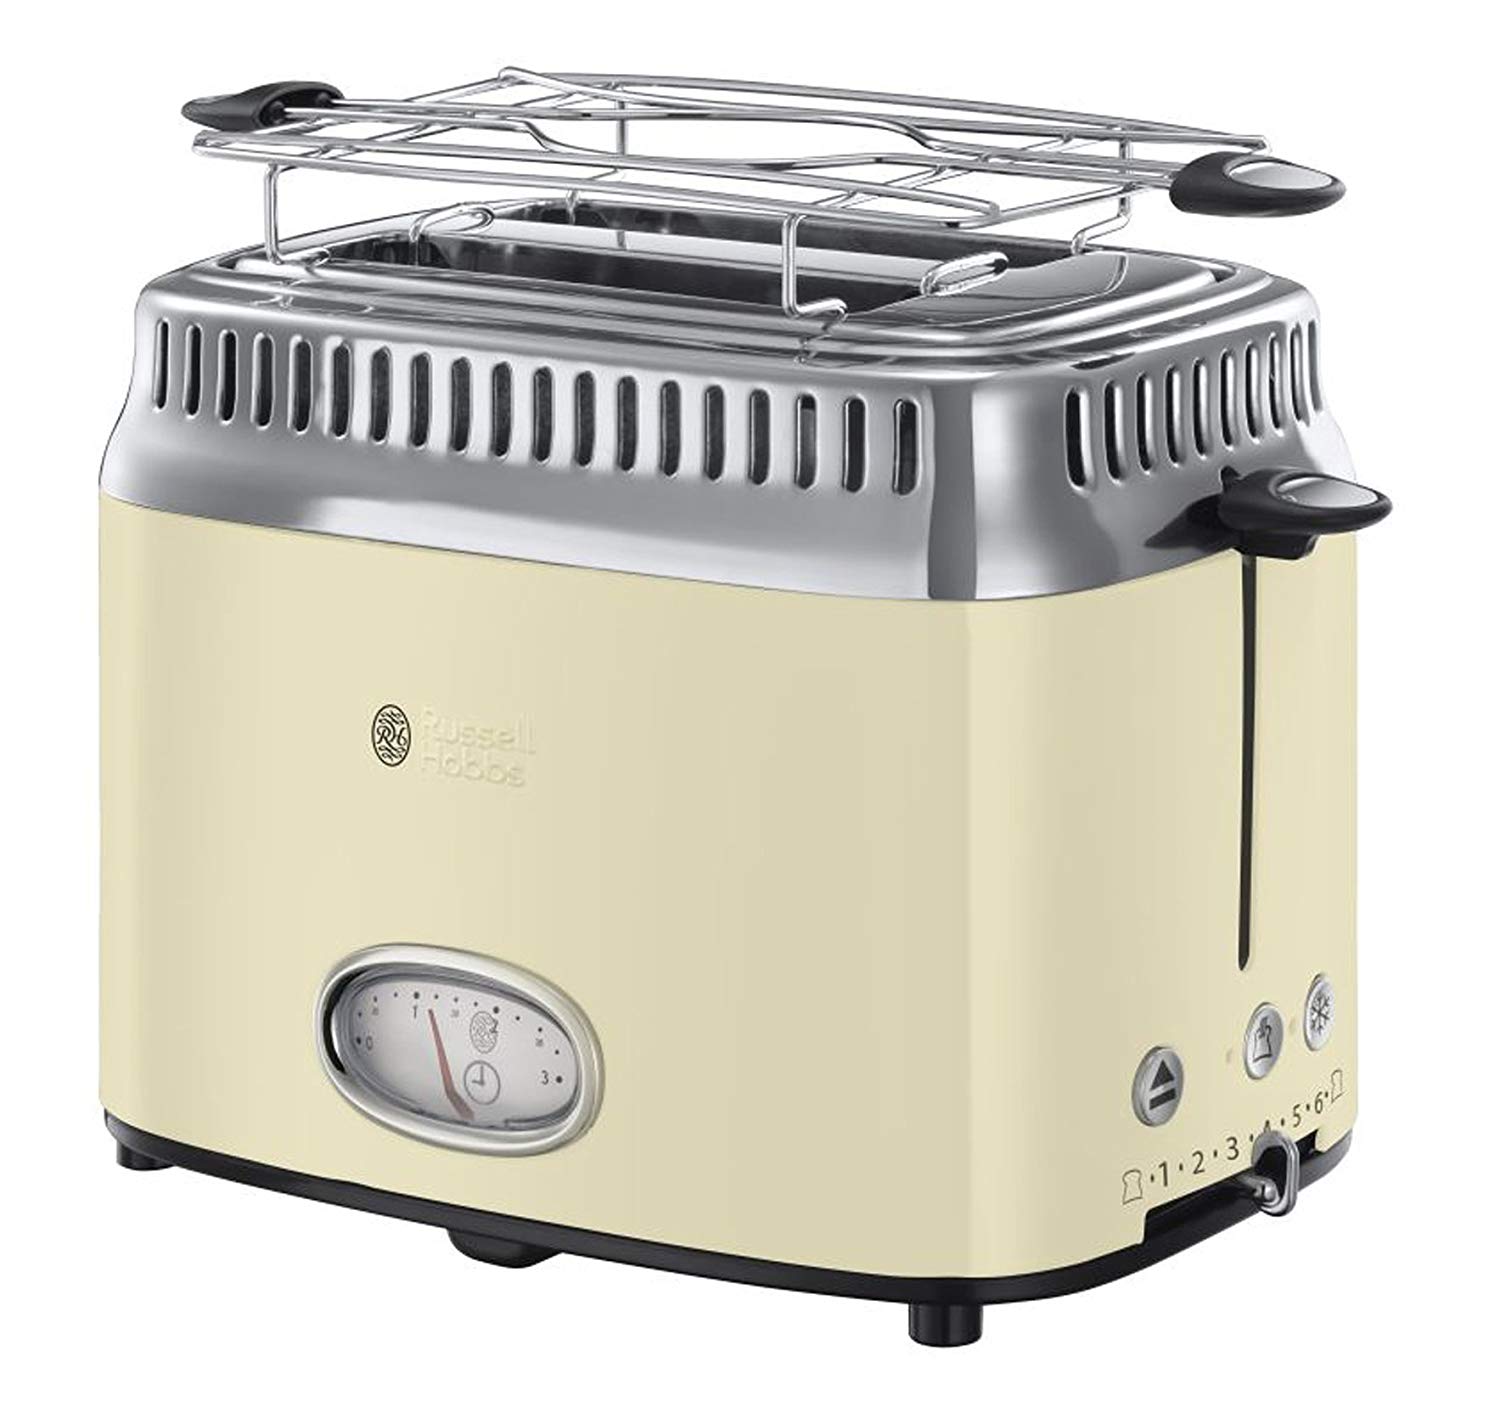 Russell Hobbs Retro Vintage Cream 21682-56 Toaster (1300 W, With Stylish Co